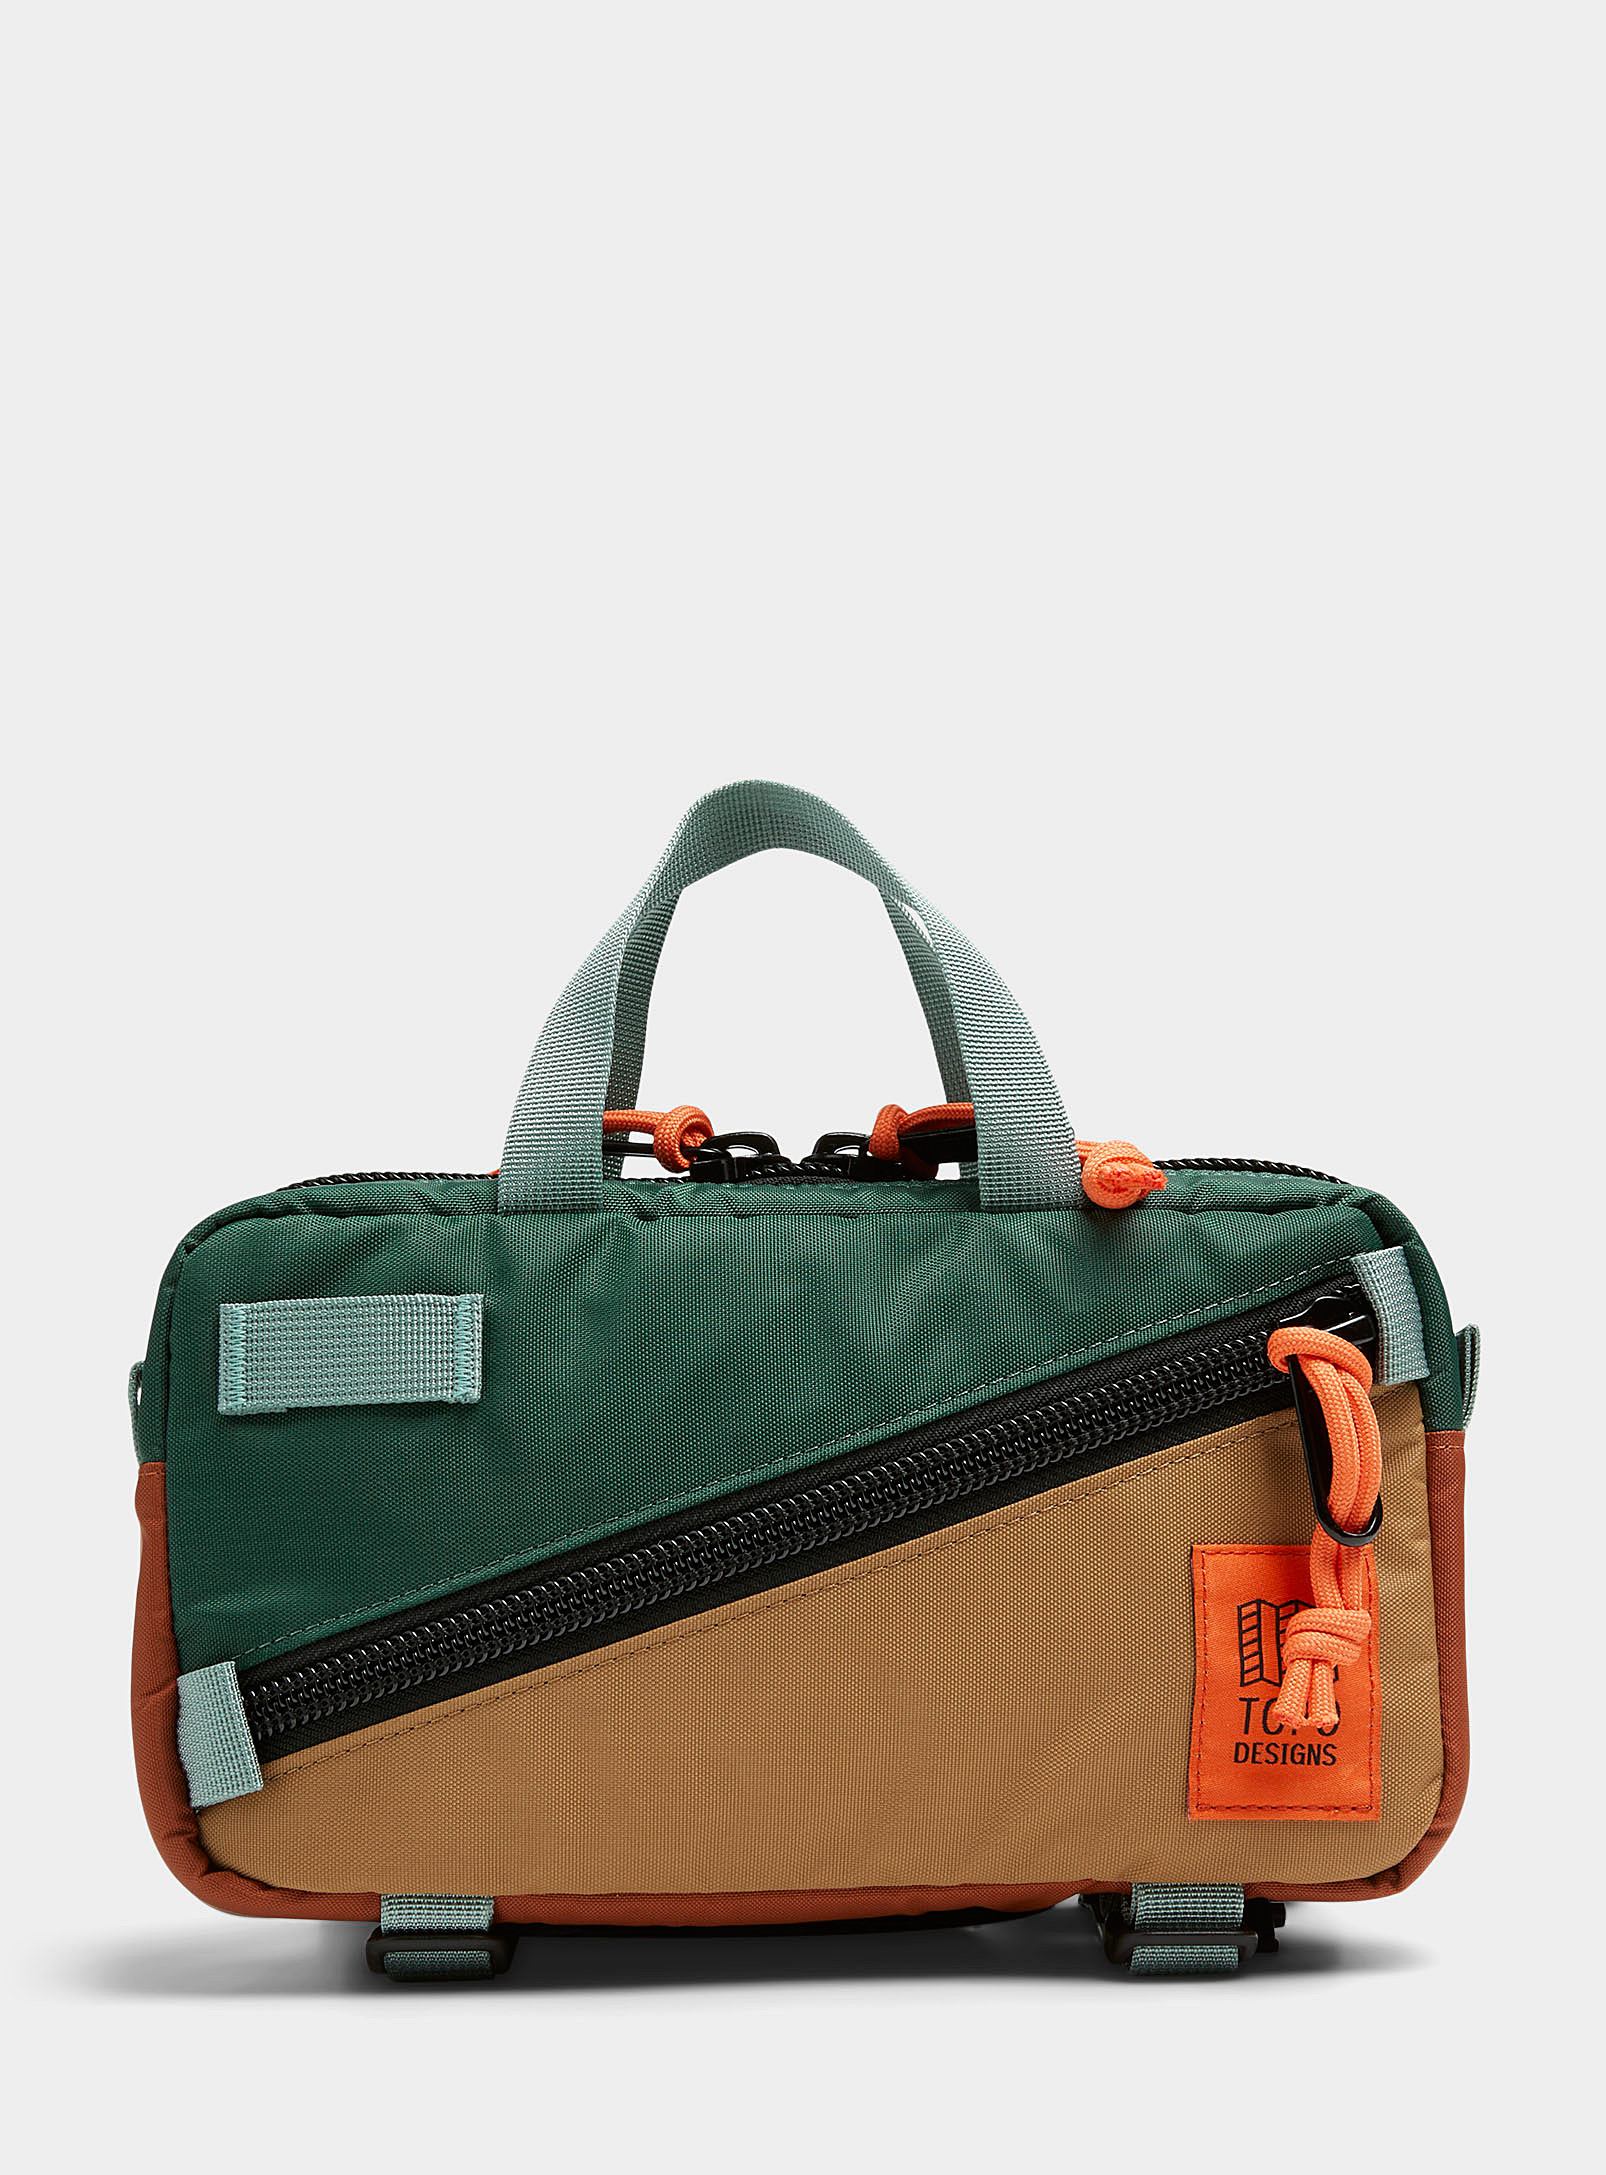 Topo Designs Small Utility Belt Bag In Mossy Green